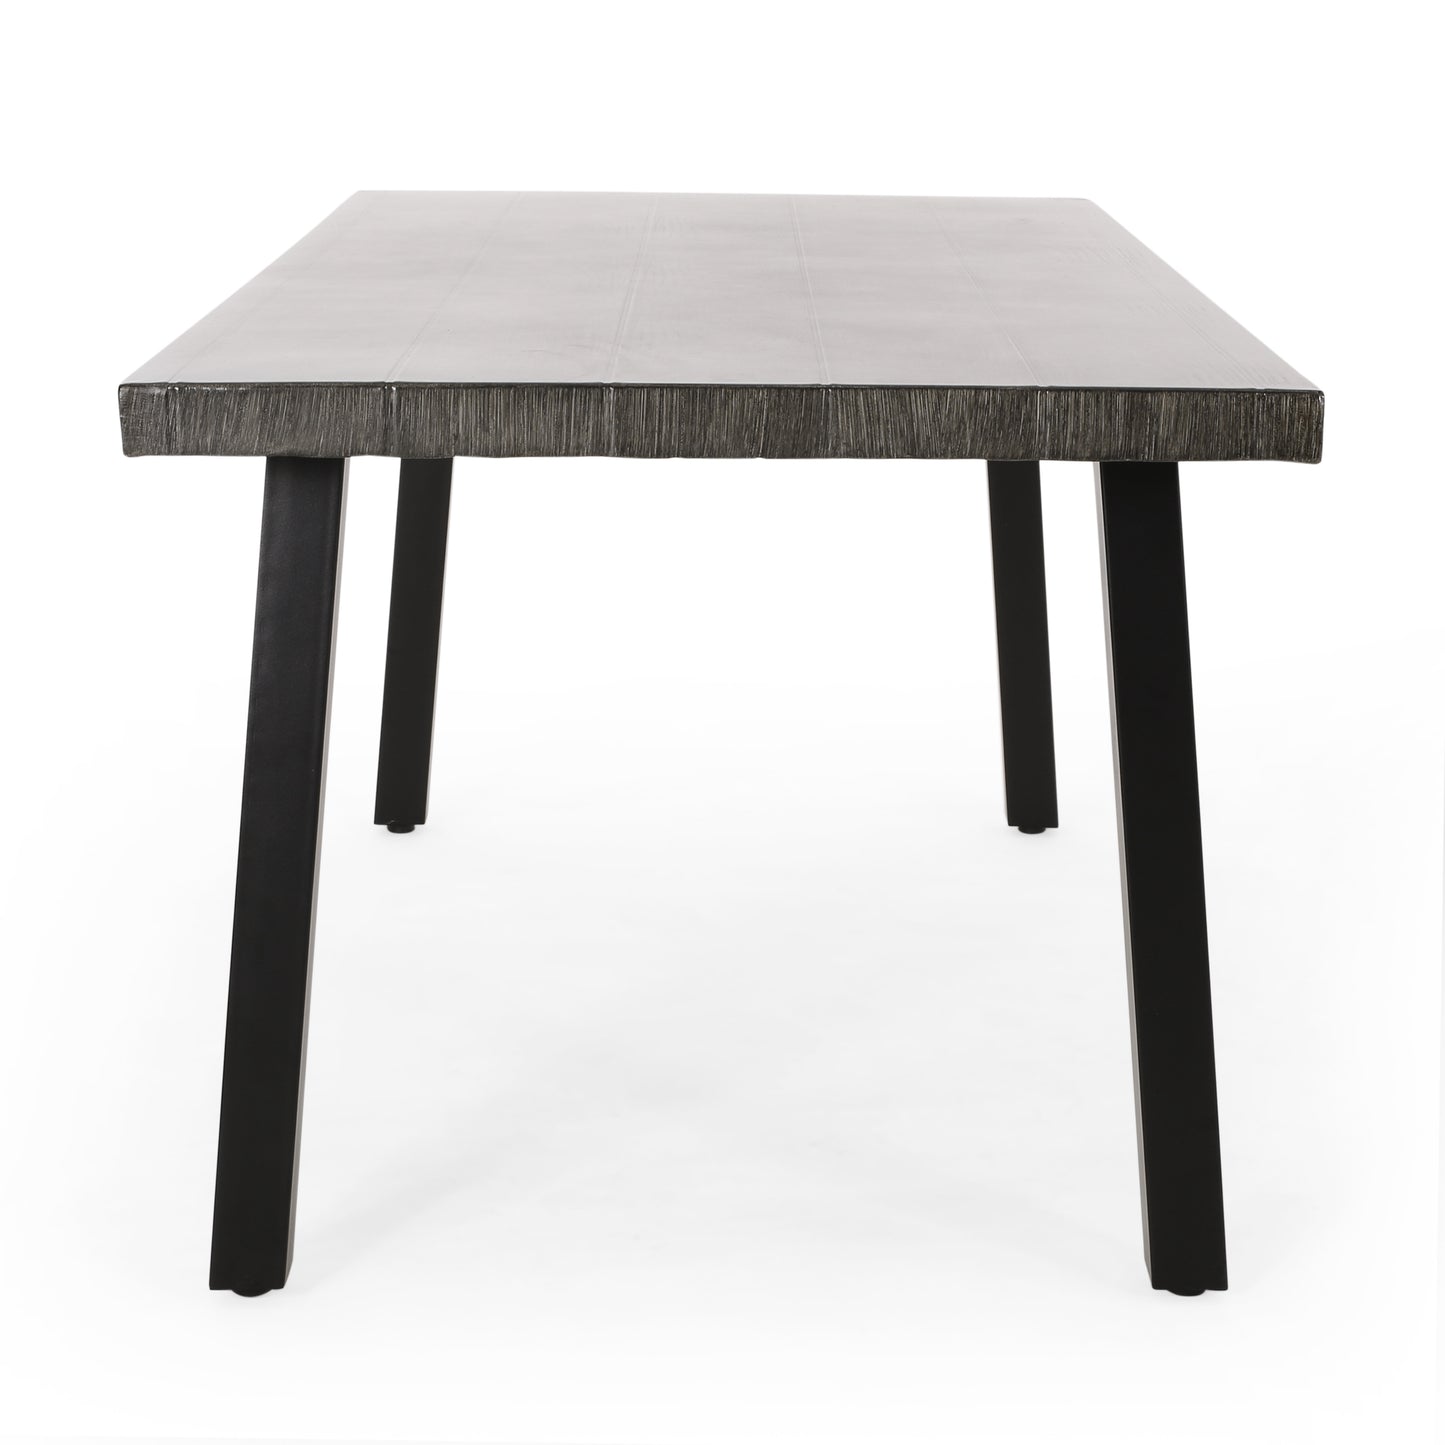 Altair Outdoor Modern Industrial Aluminum Dining Table